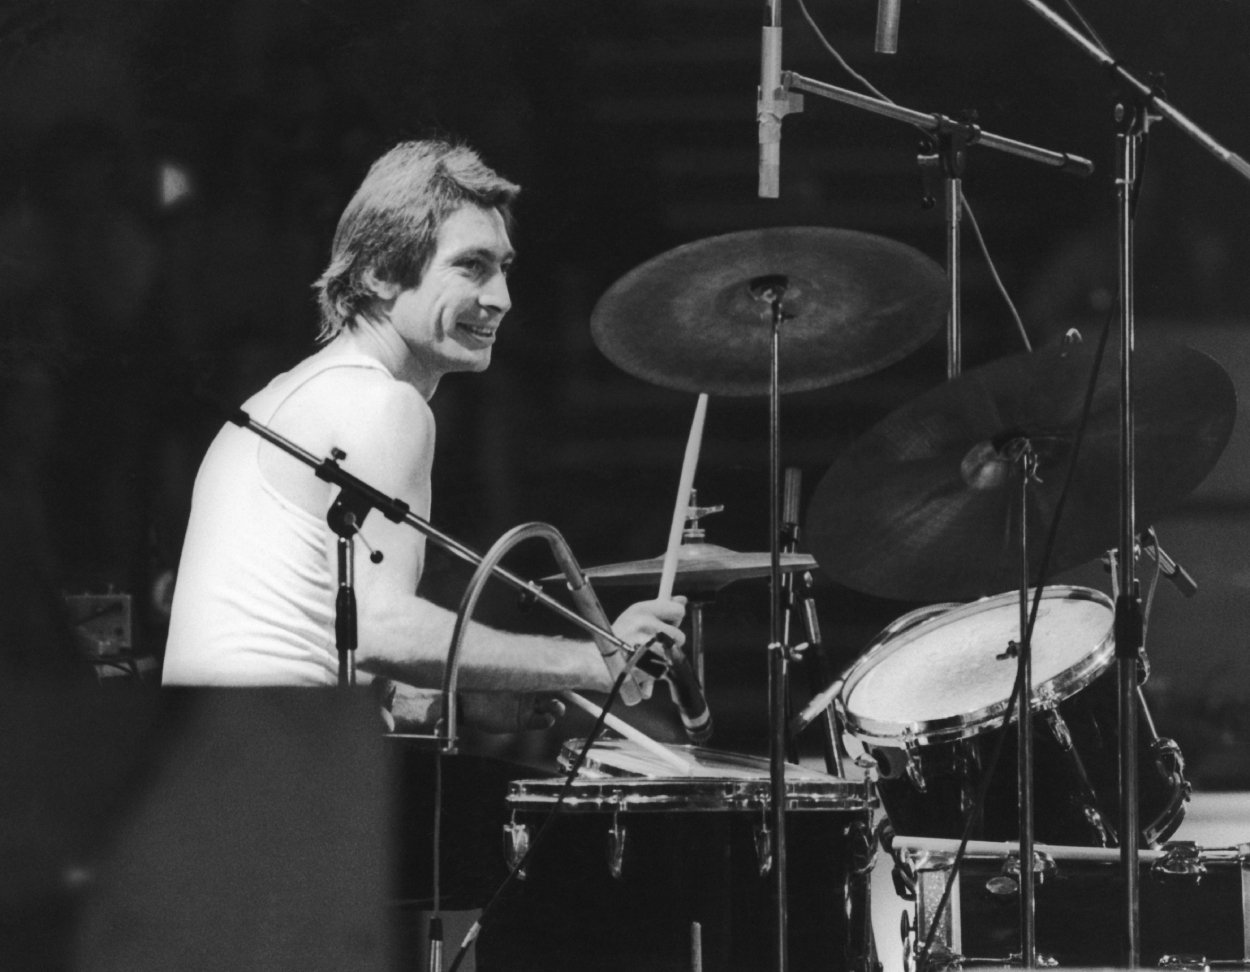 Charlie Watts drumming for The Rolling Stones